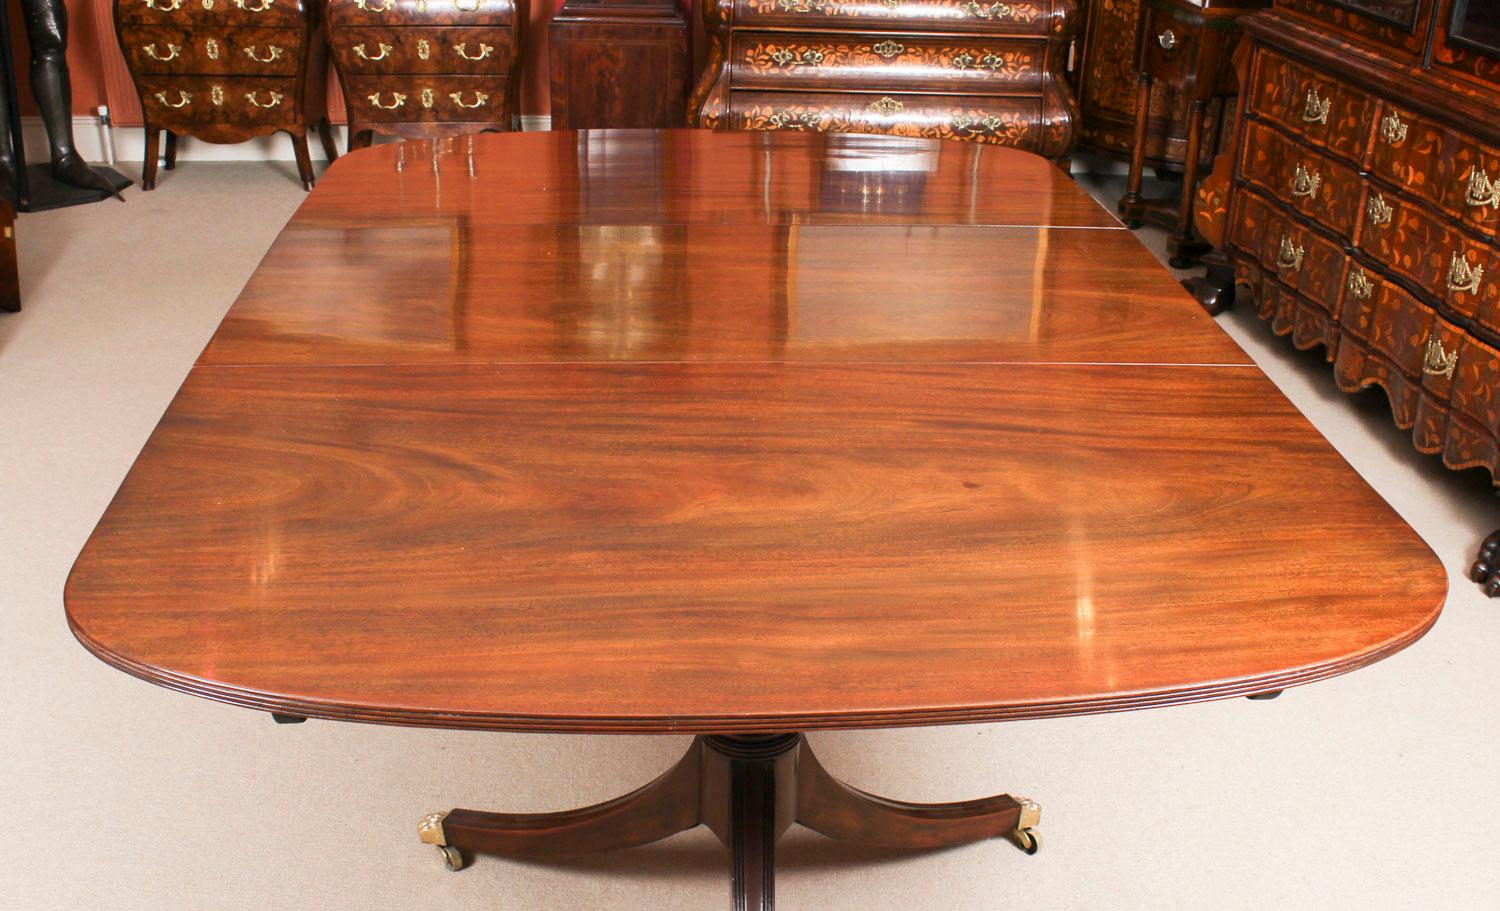 George III Regency Dining Table 19th Century with 8 Bespoke Dining Chairs 4